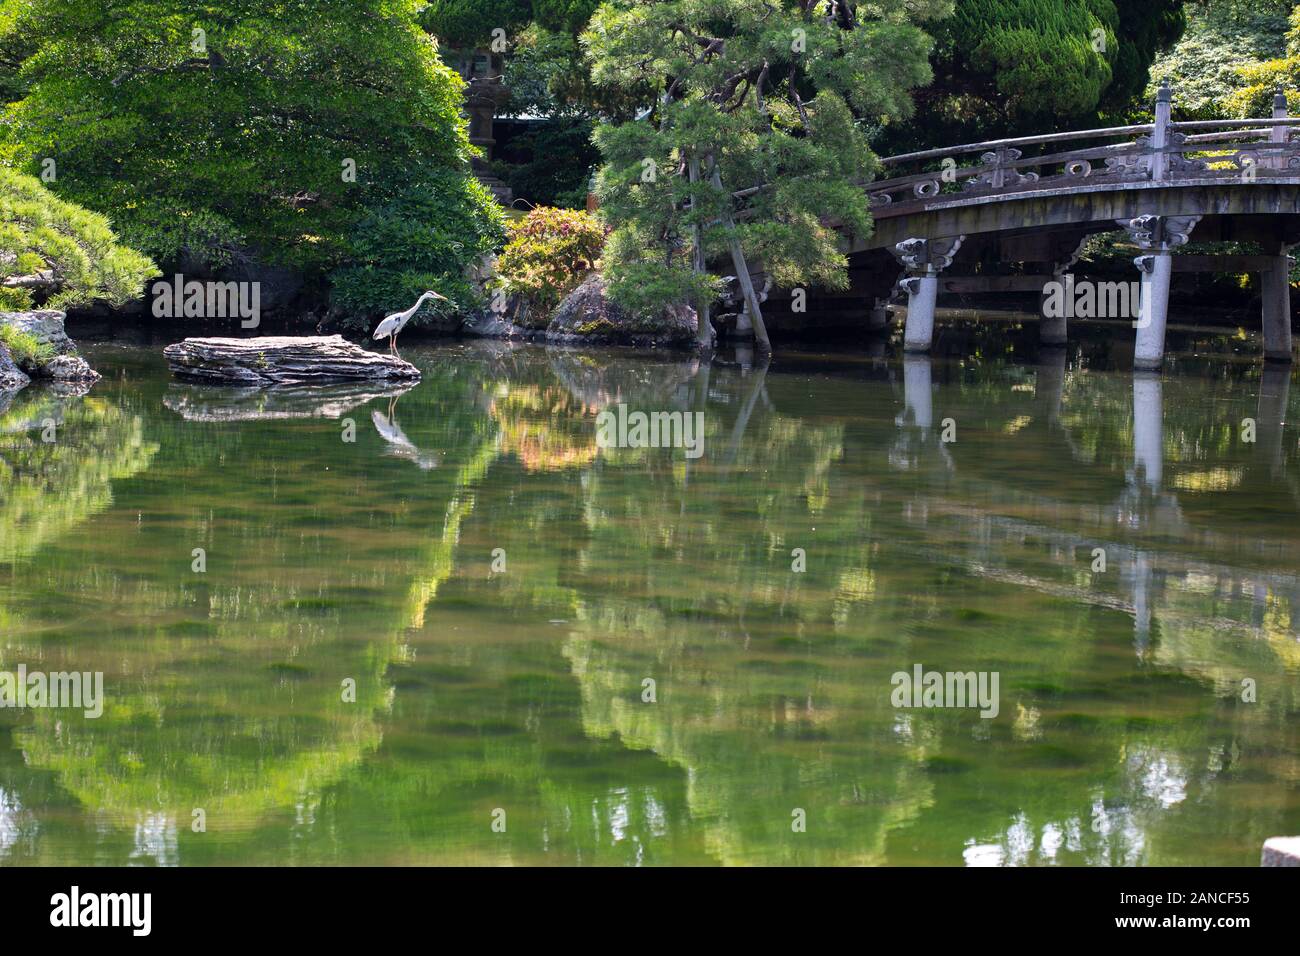 Design elements from the garden and grounds of the Imperial Palace in Kyoto, Japan Stock Photo